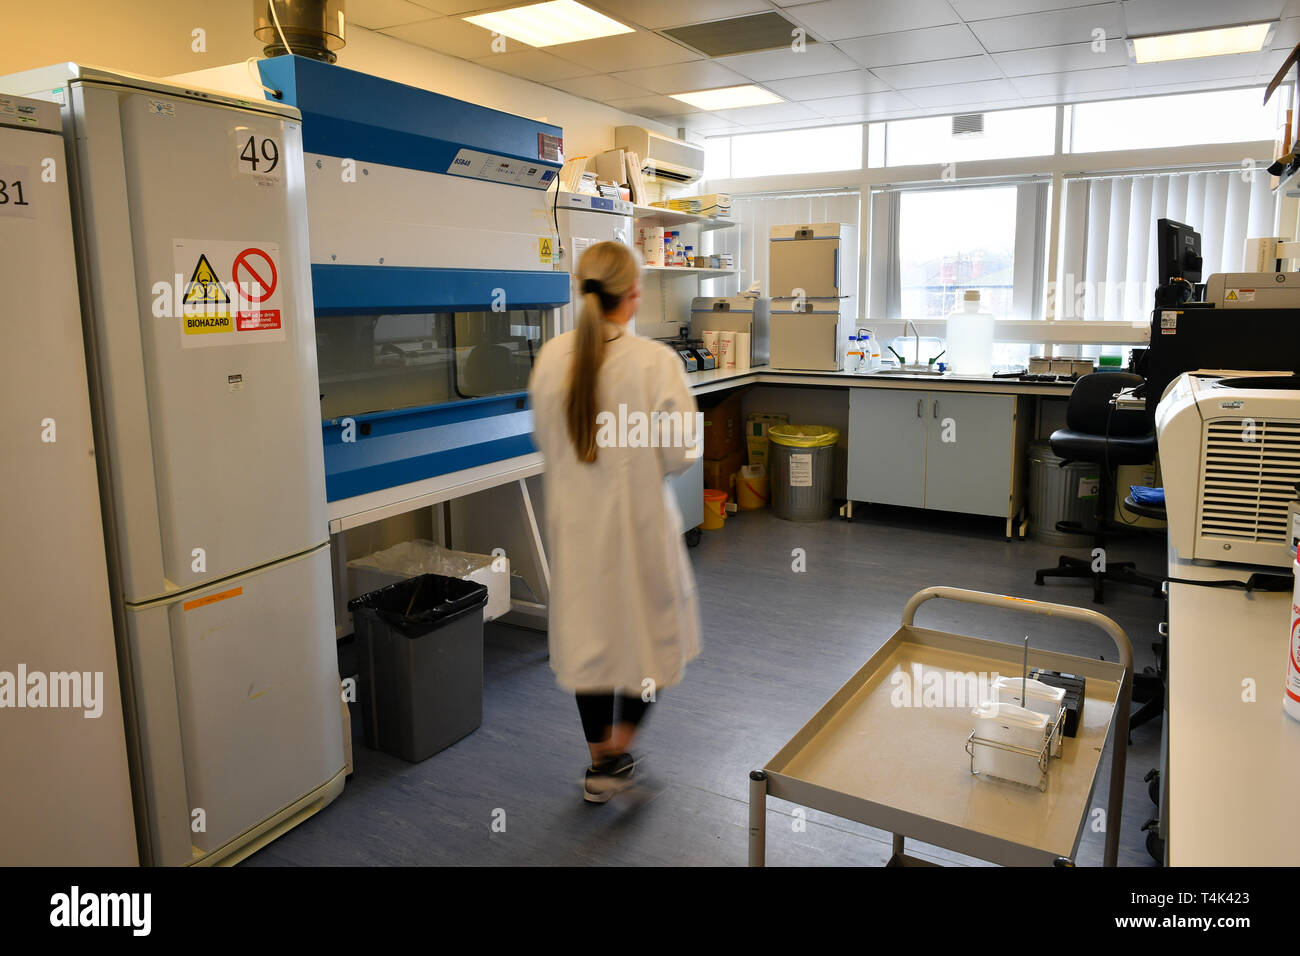 A technician in a medical clinical laboratory, based at University of Bristol. PRESS ASSOCIATION Photo. Picture date: Monday April 8, 2019. Photo credit should read: Ben Birchall Stock Photo